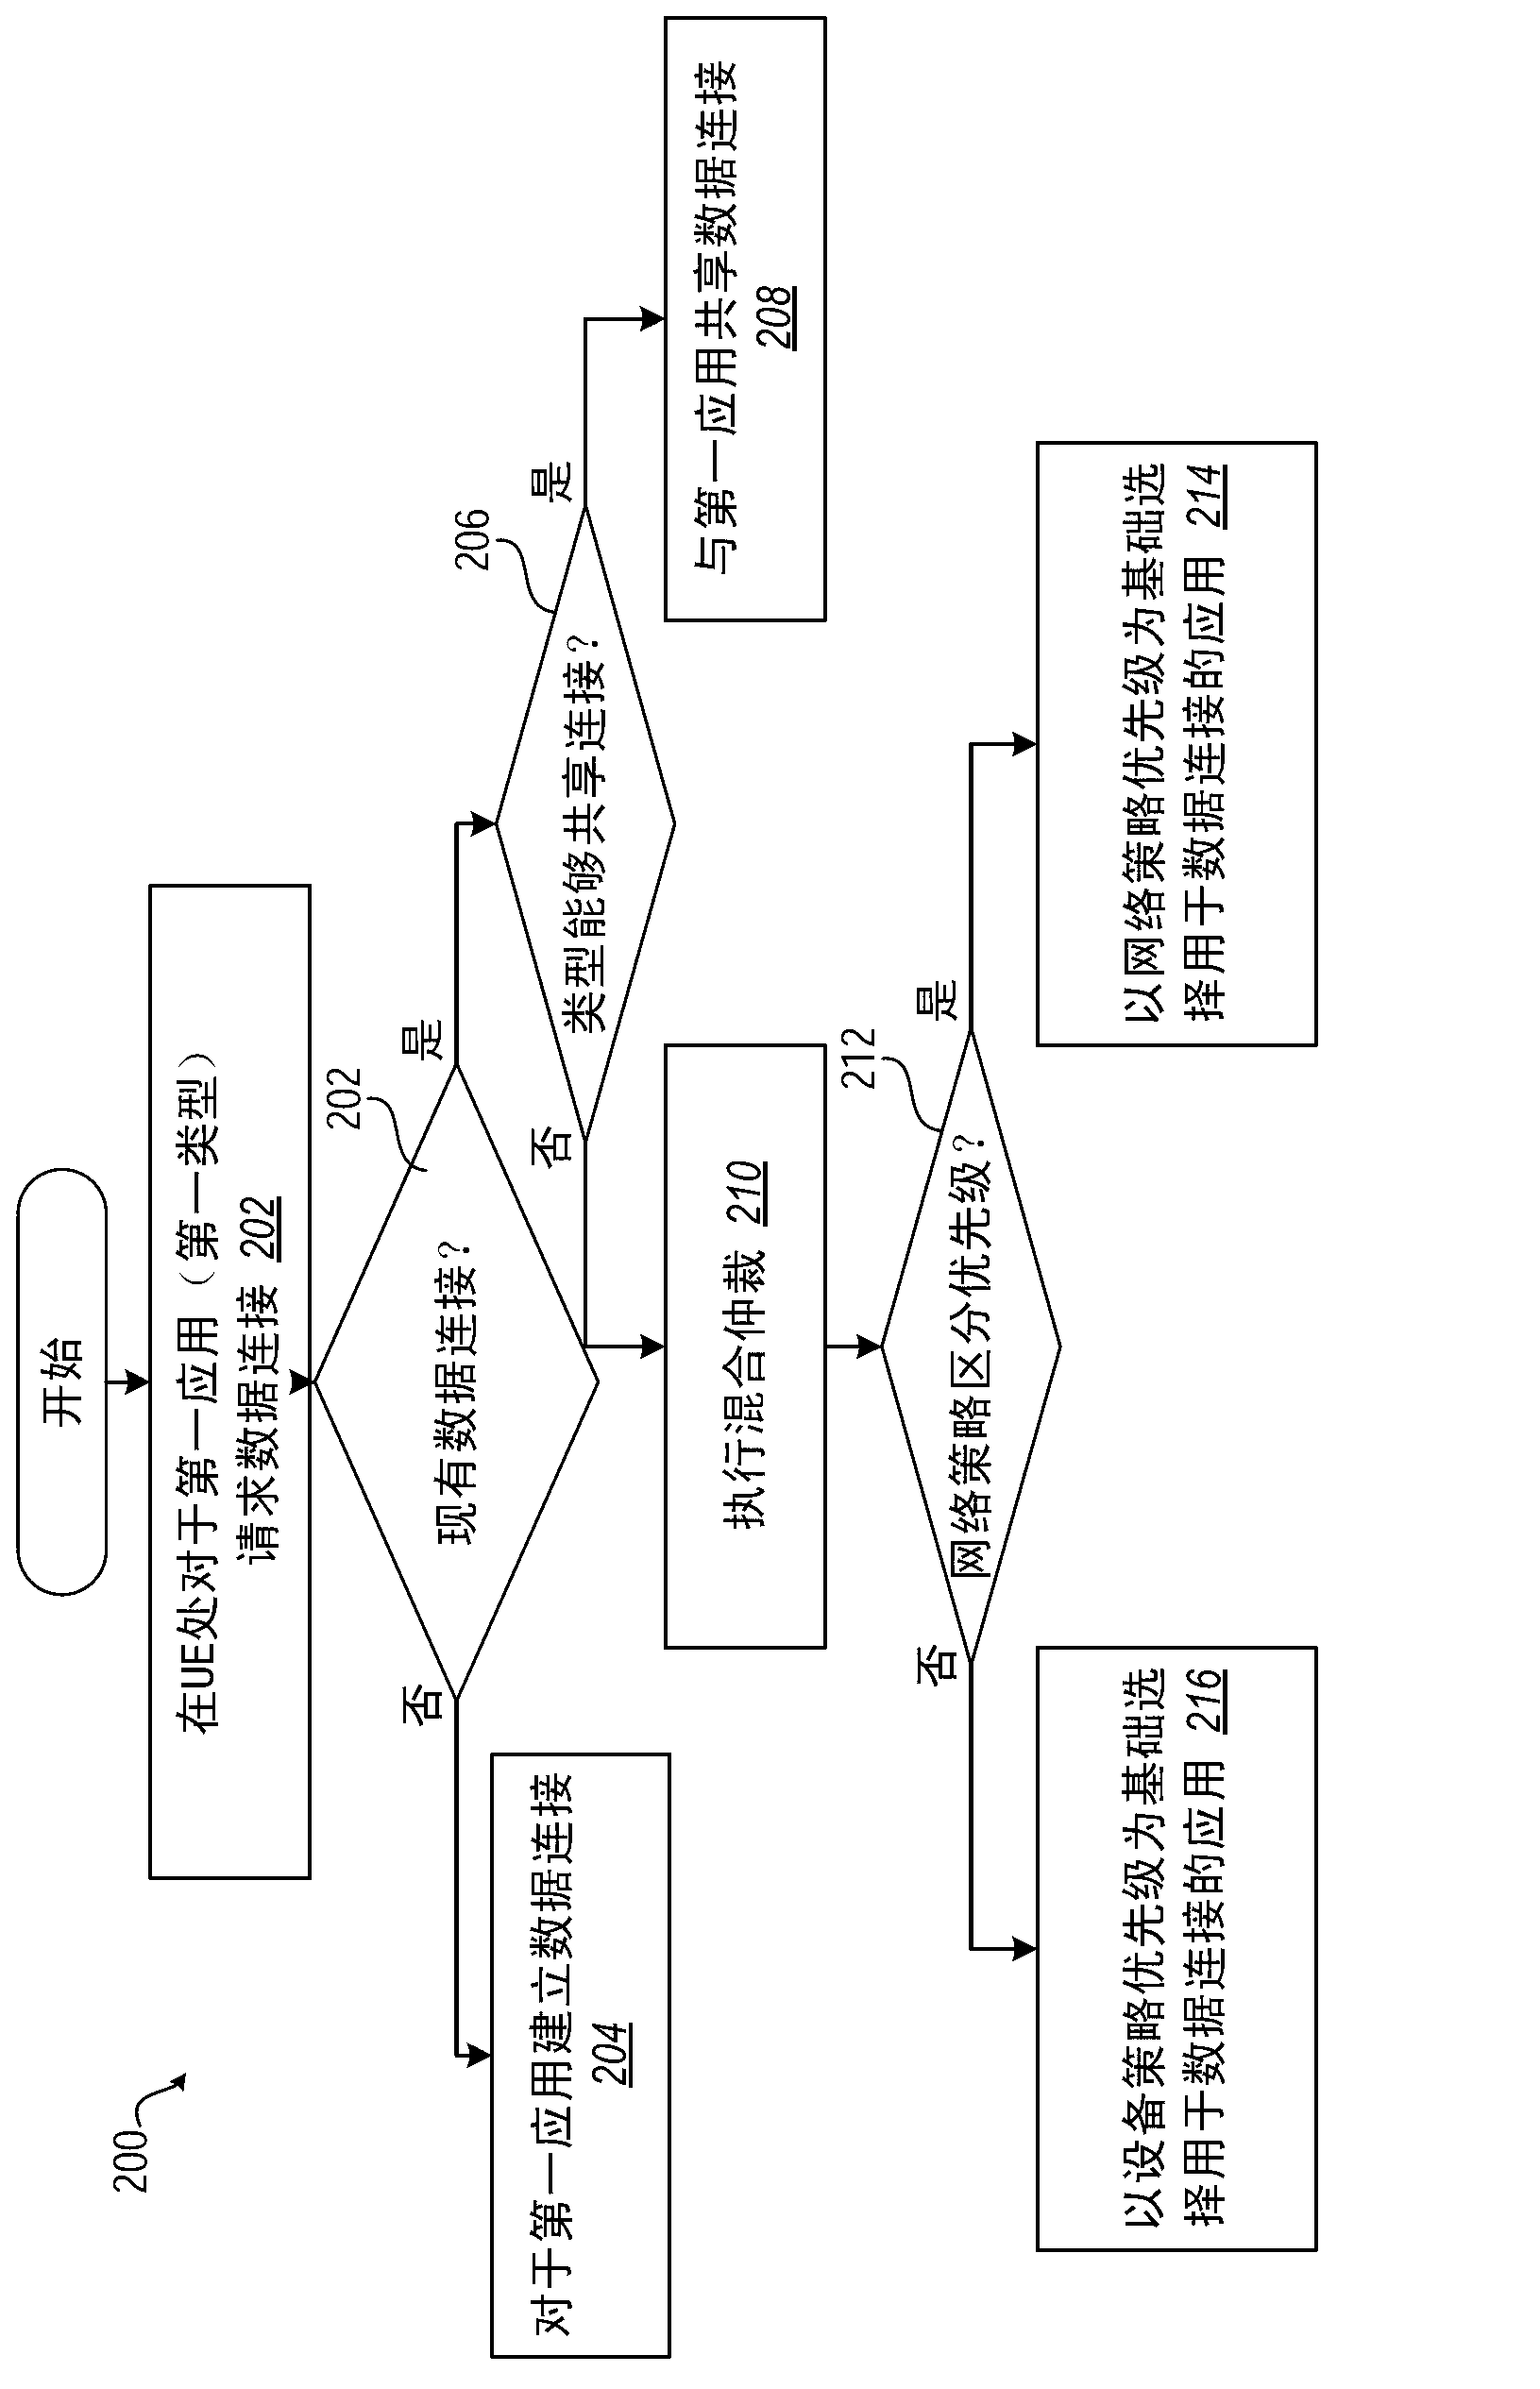 Methods and apparatus of integrating device policy and network policy for arbitration of packet data applications